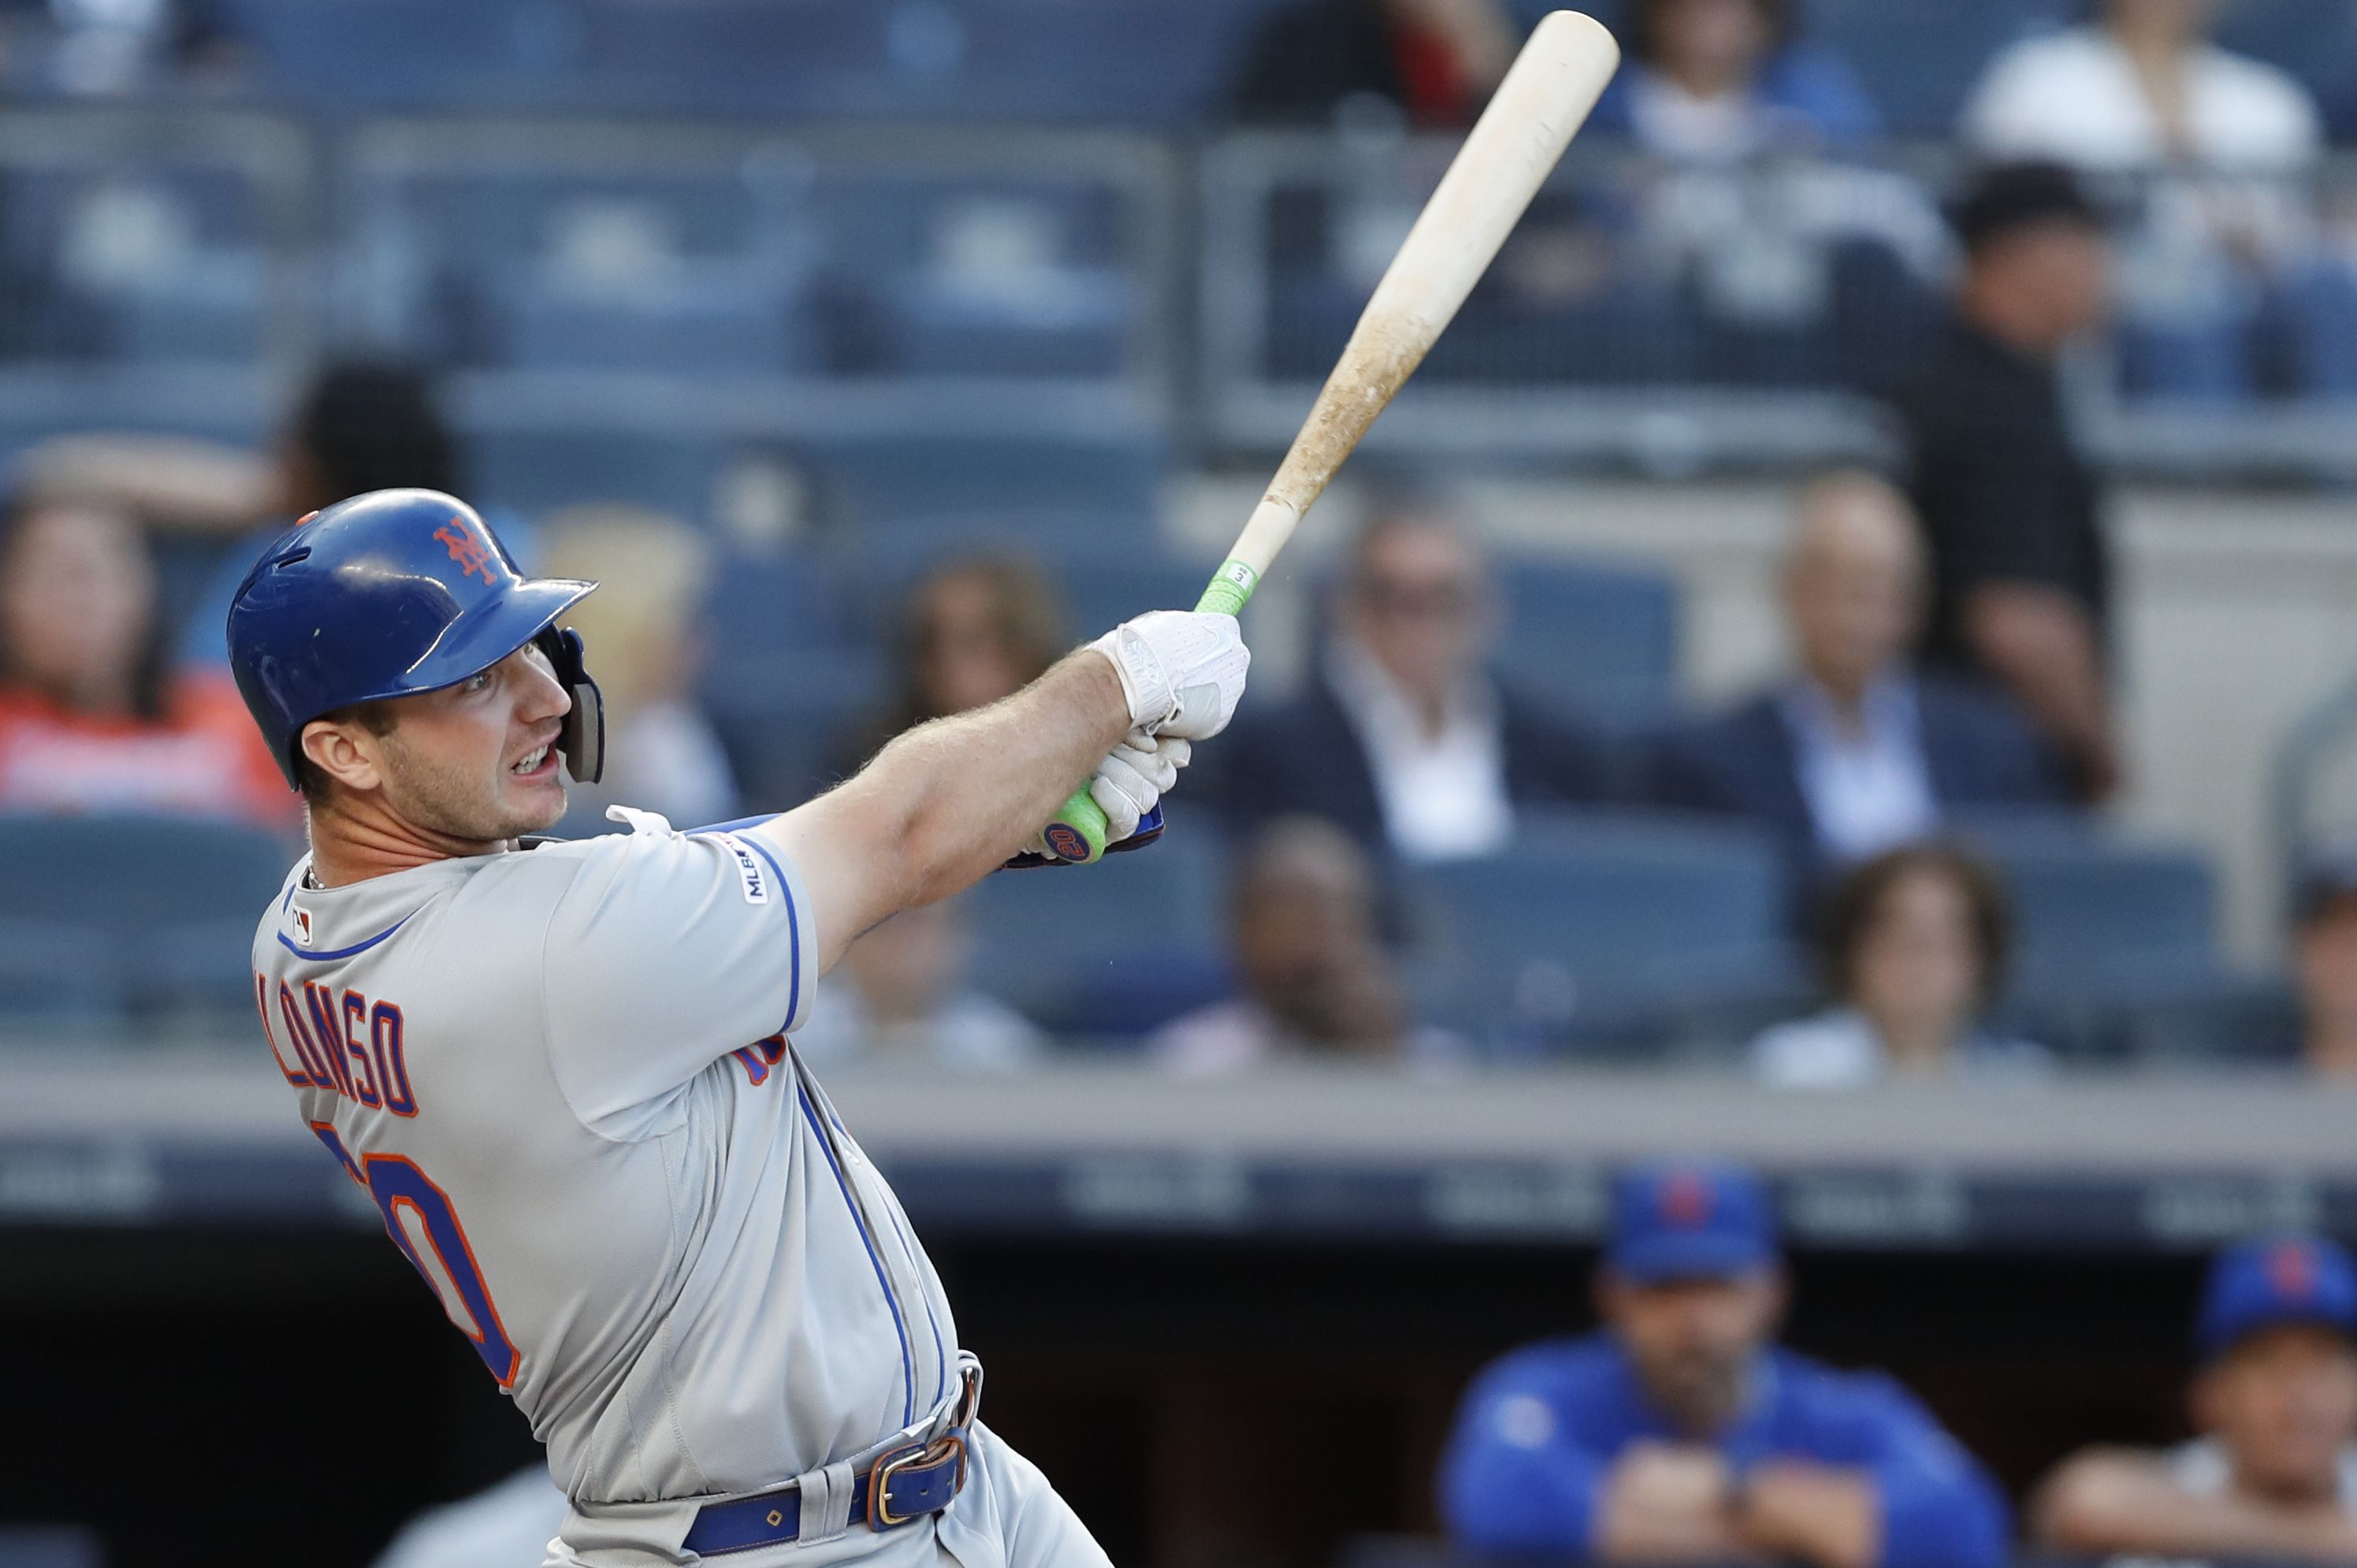 Florida Baseball: Pete Alonso will participate in the Home Run Derby